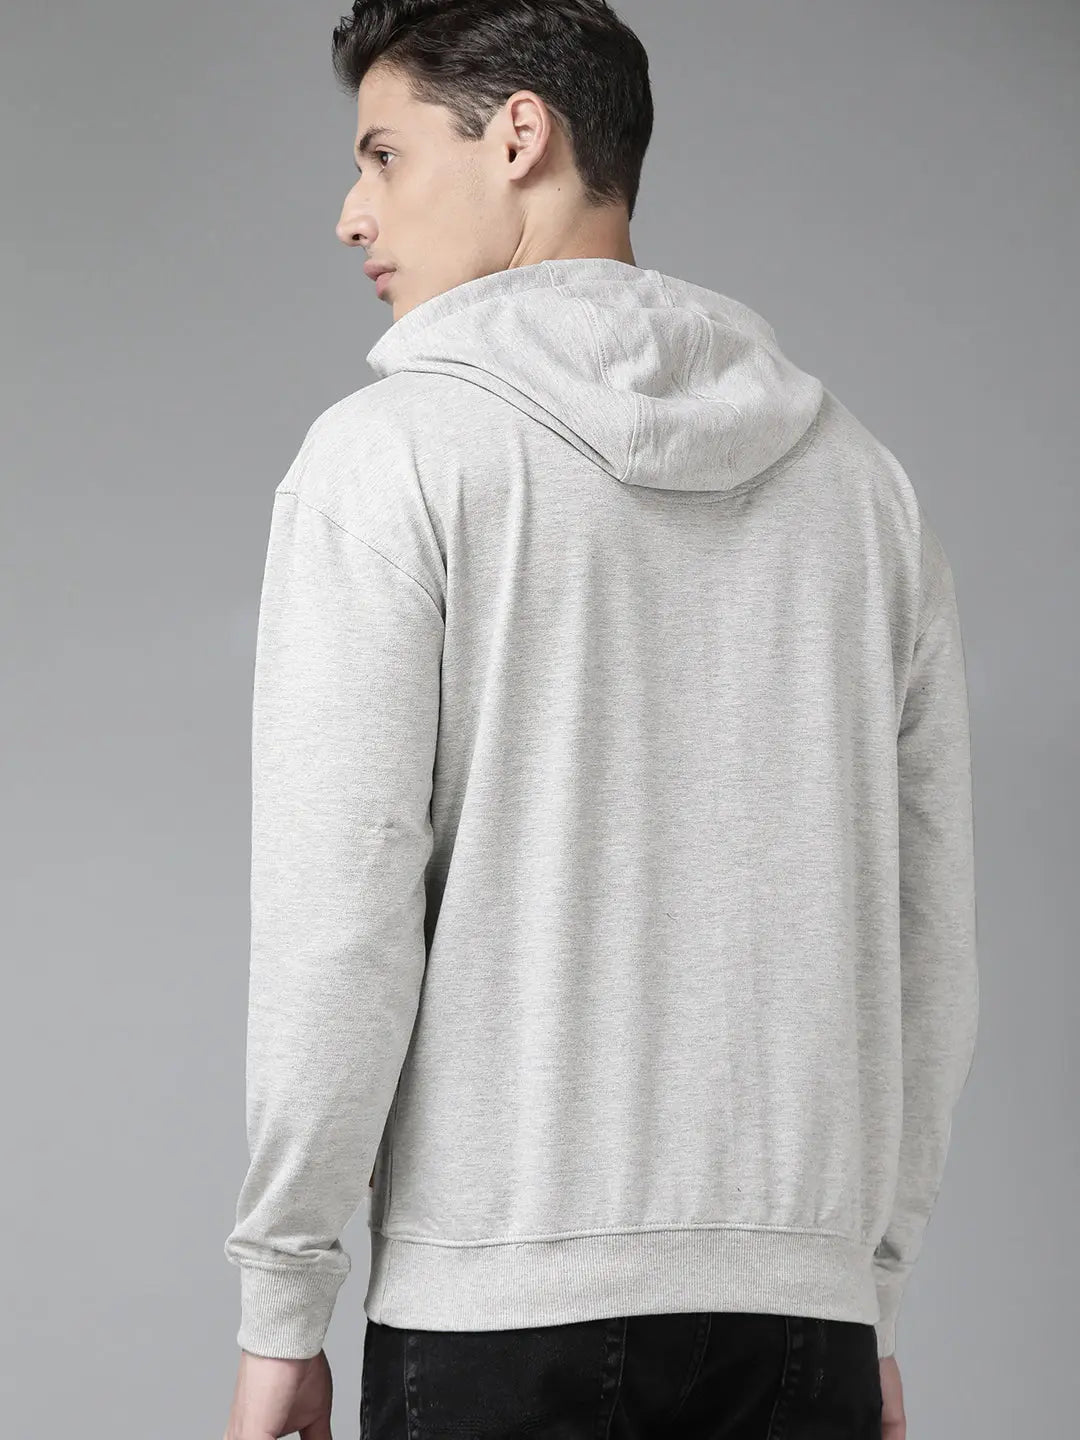 Wound UP Fleece Pullover Hoodie For Men-White Melange With Print-SP332